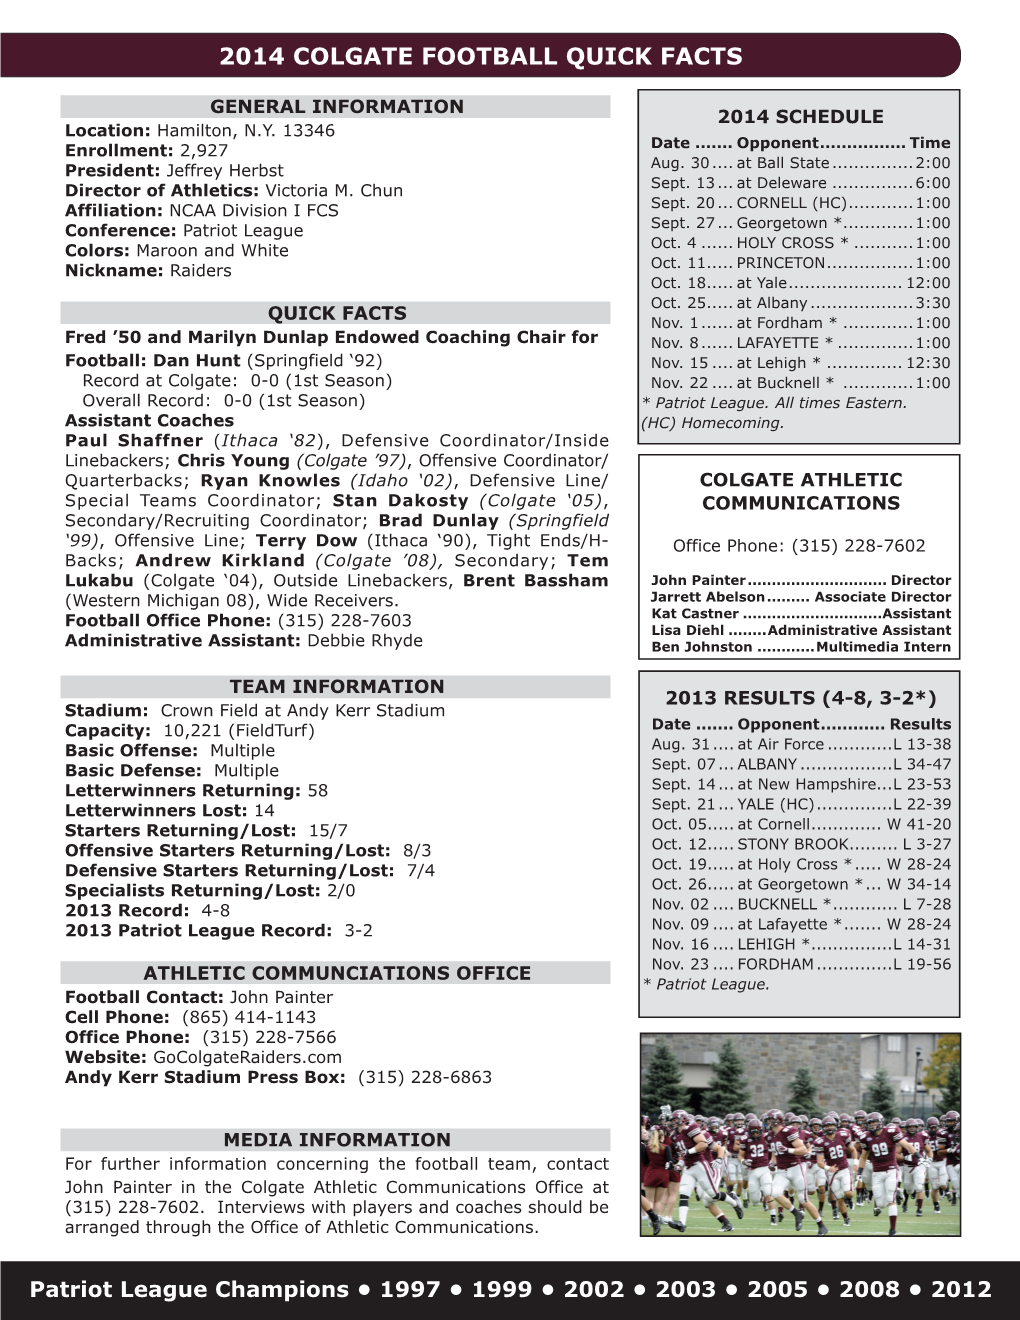 2014 Colgate Football Quick Facts